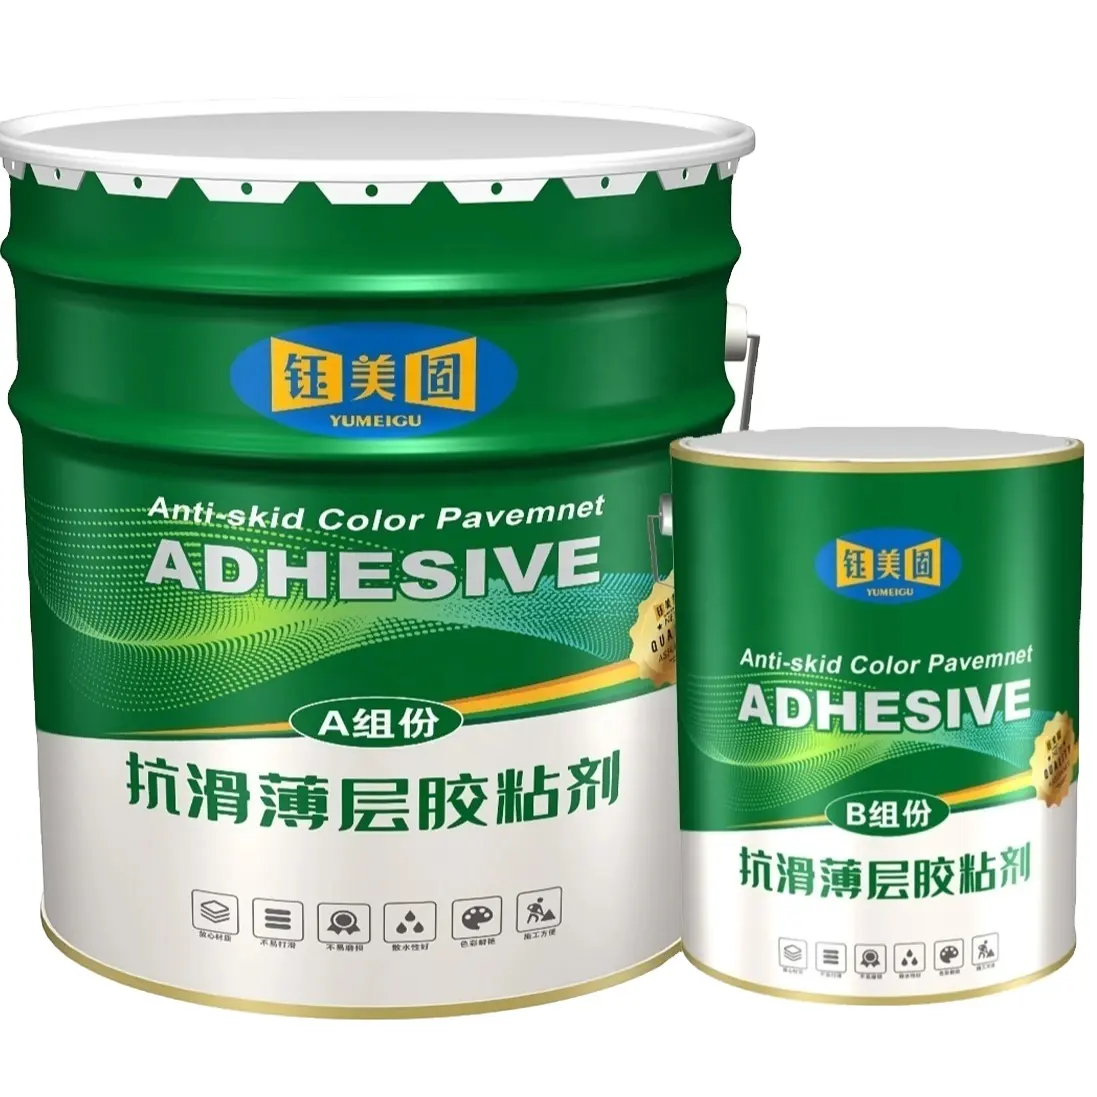 High Quality Asphalt Foundation Color Epoxy Adhesive & Sealant for Construction for Pavement Material